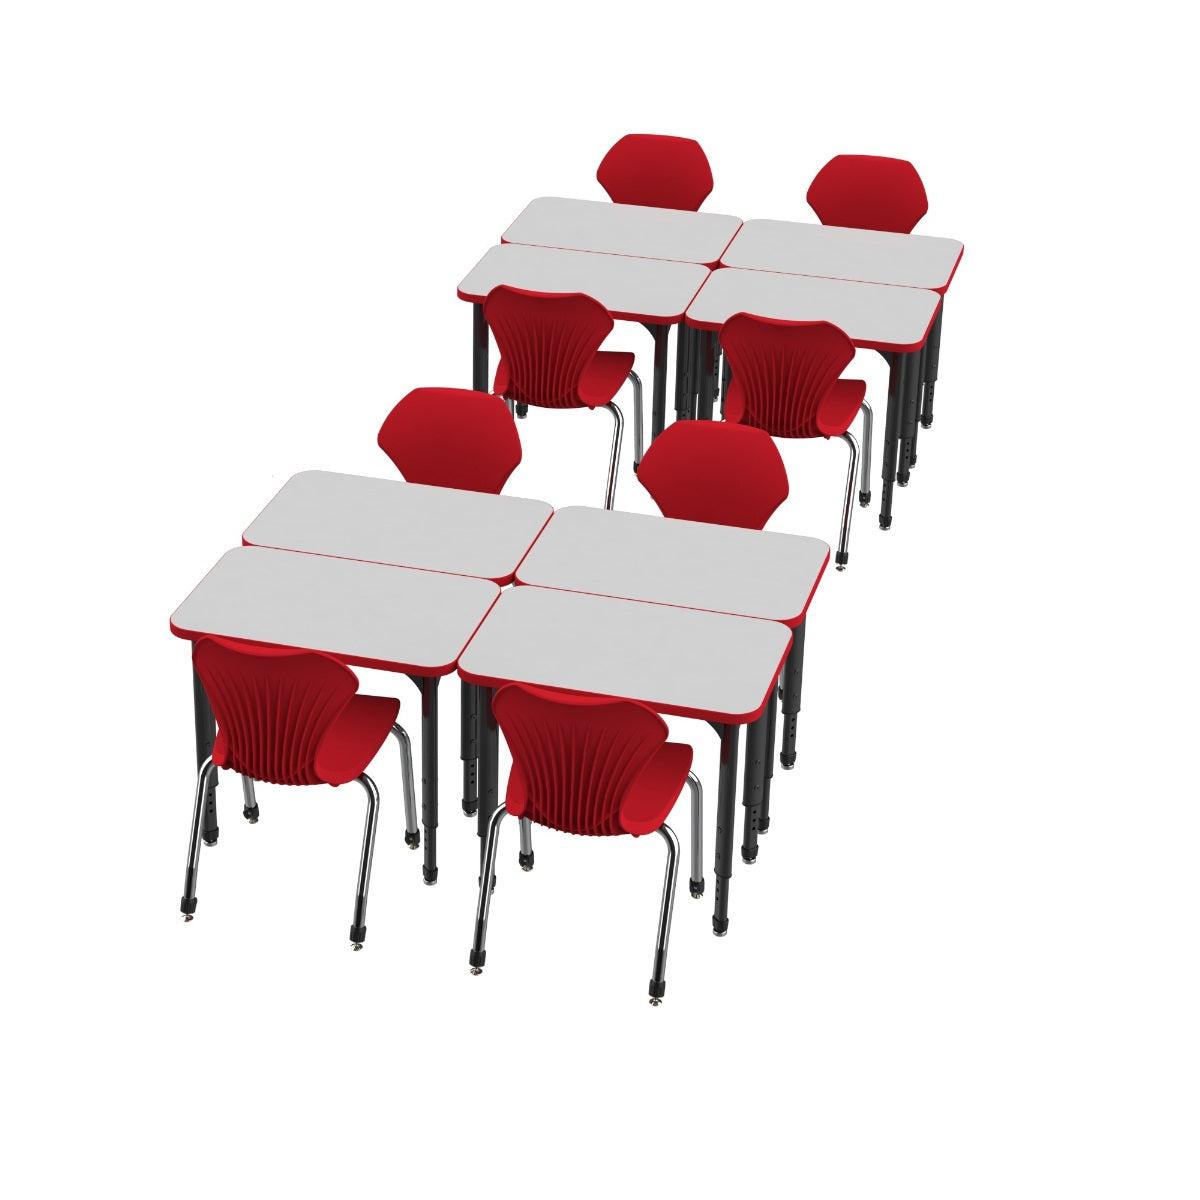 Apex Dry Erase Classroom Desk and Chair Package, 8 Rectangle Collaborative Student Desks, 20" x 36", with 8 Apex Stack Chairs